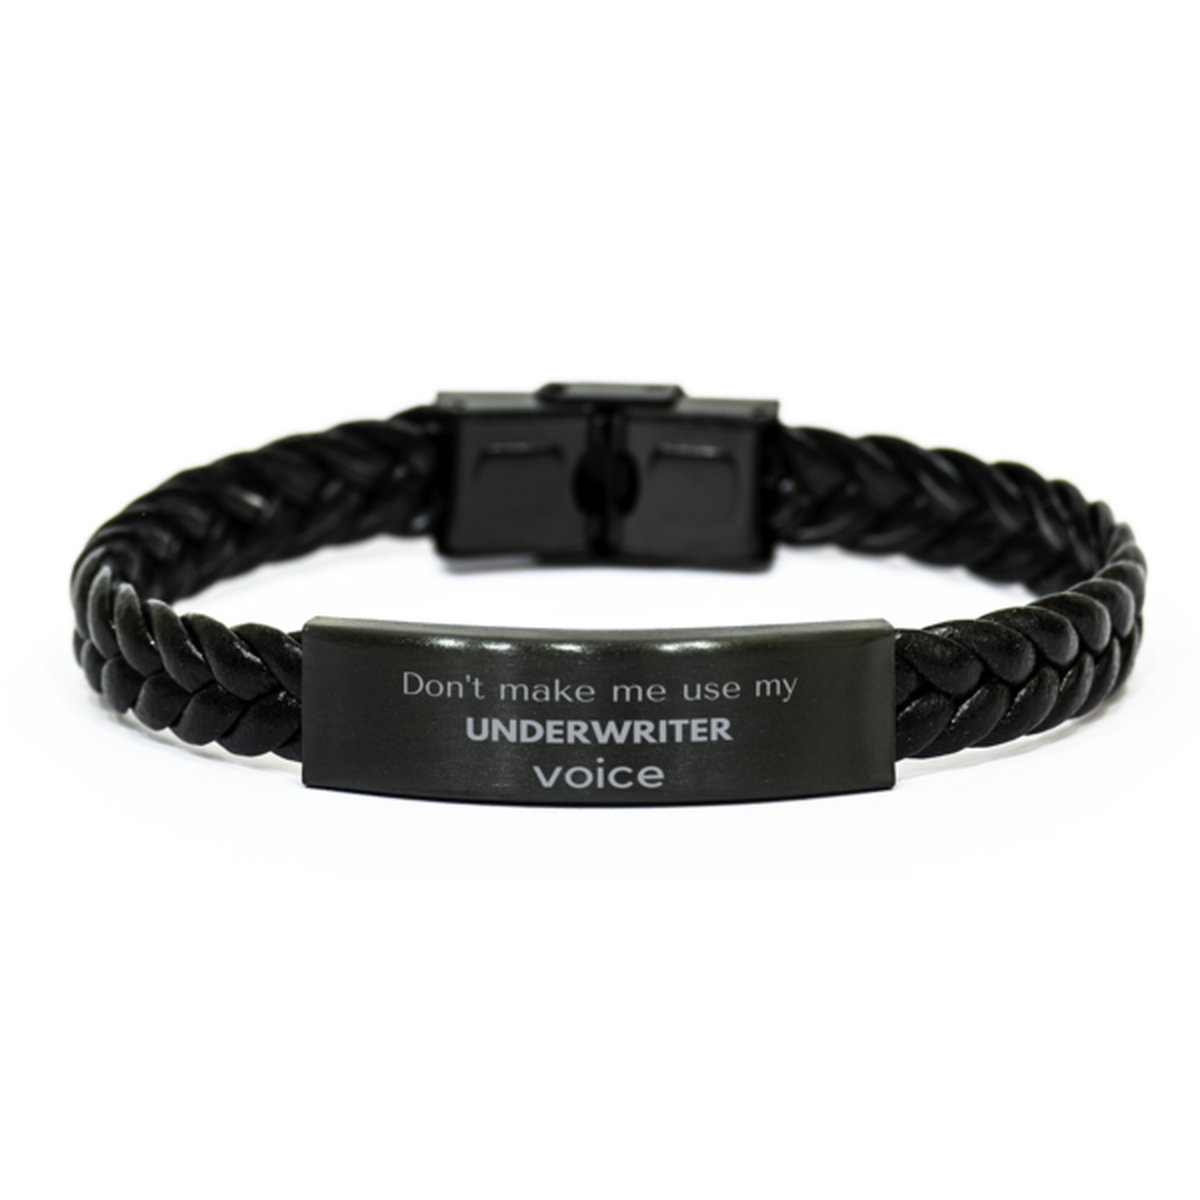 Don't make me use my Underwriter voice, Sarcasm Underwriter Gifts, Christmas Underwriter Braided Leather Bracelet Birthday Unique Gifts For Underwriter Coworkers, Men, Women, Colleague, Friends